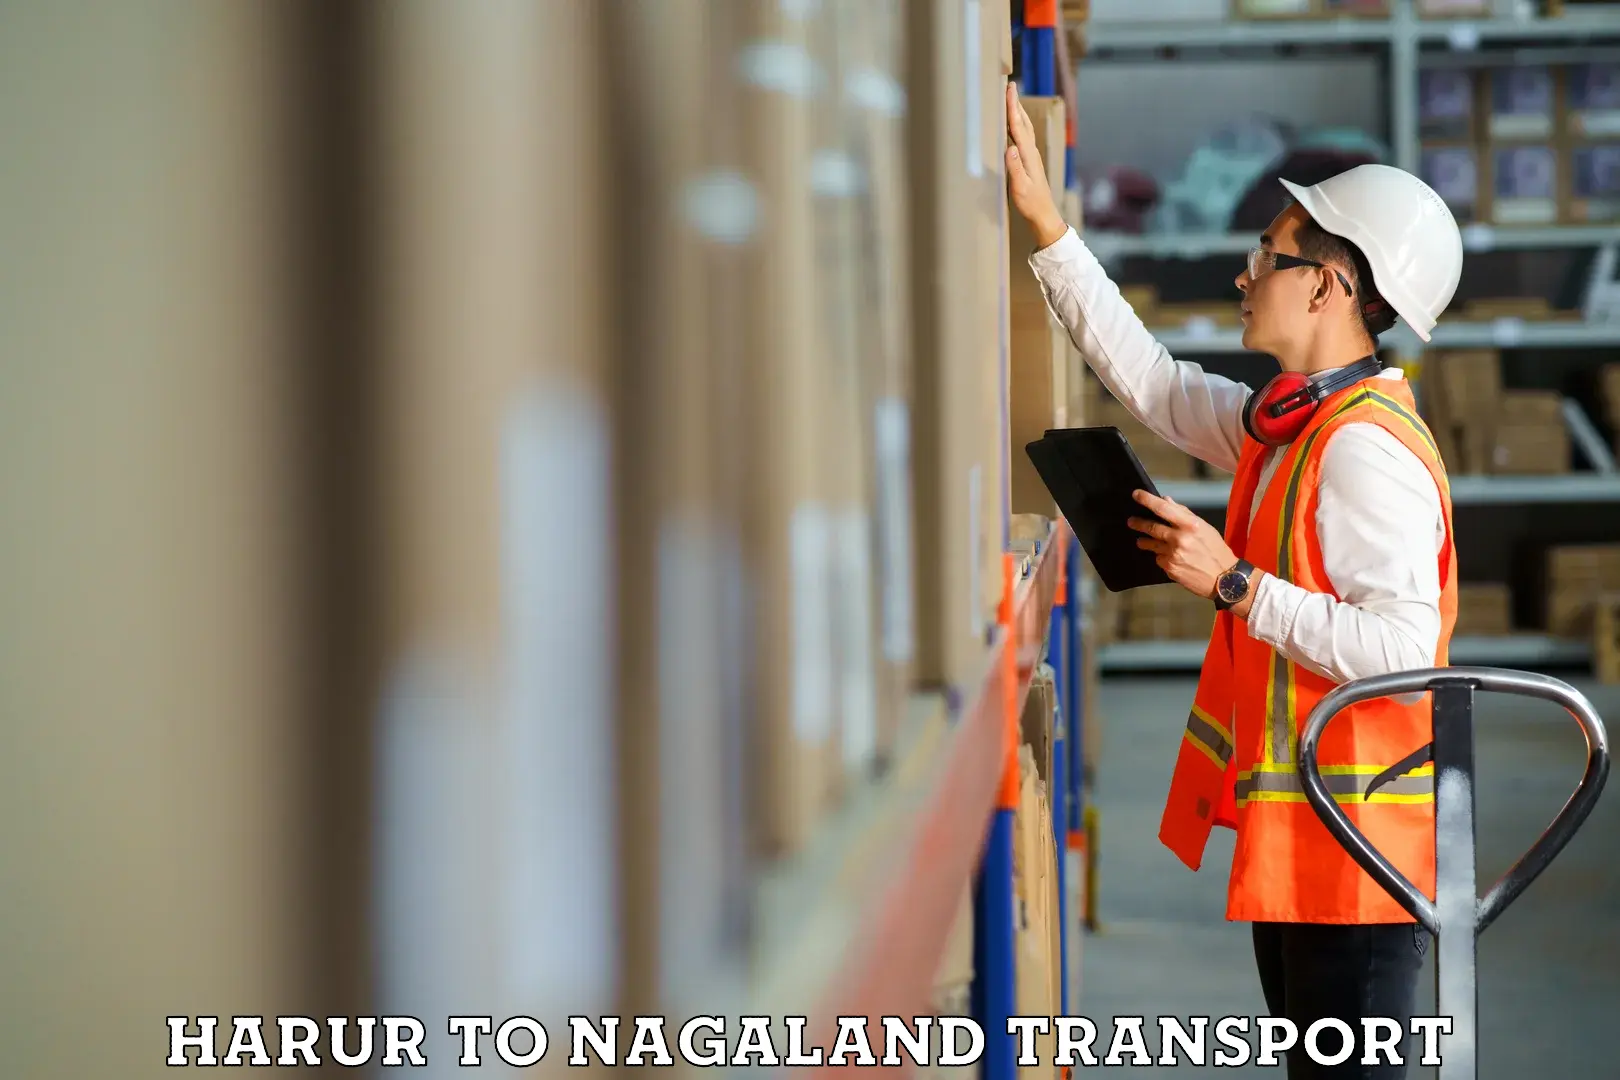 Commercial transport service Harur to Nagaland